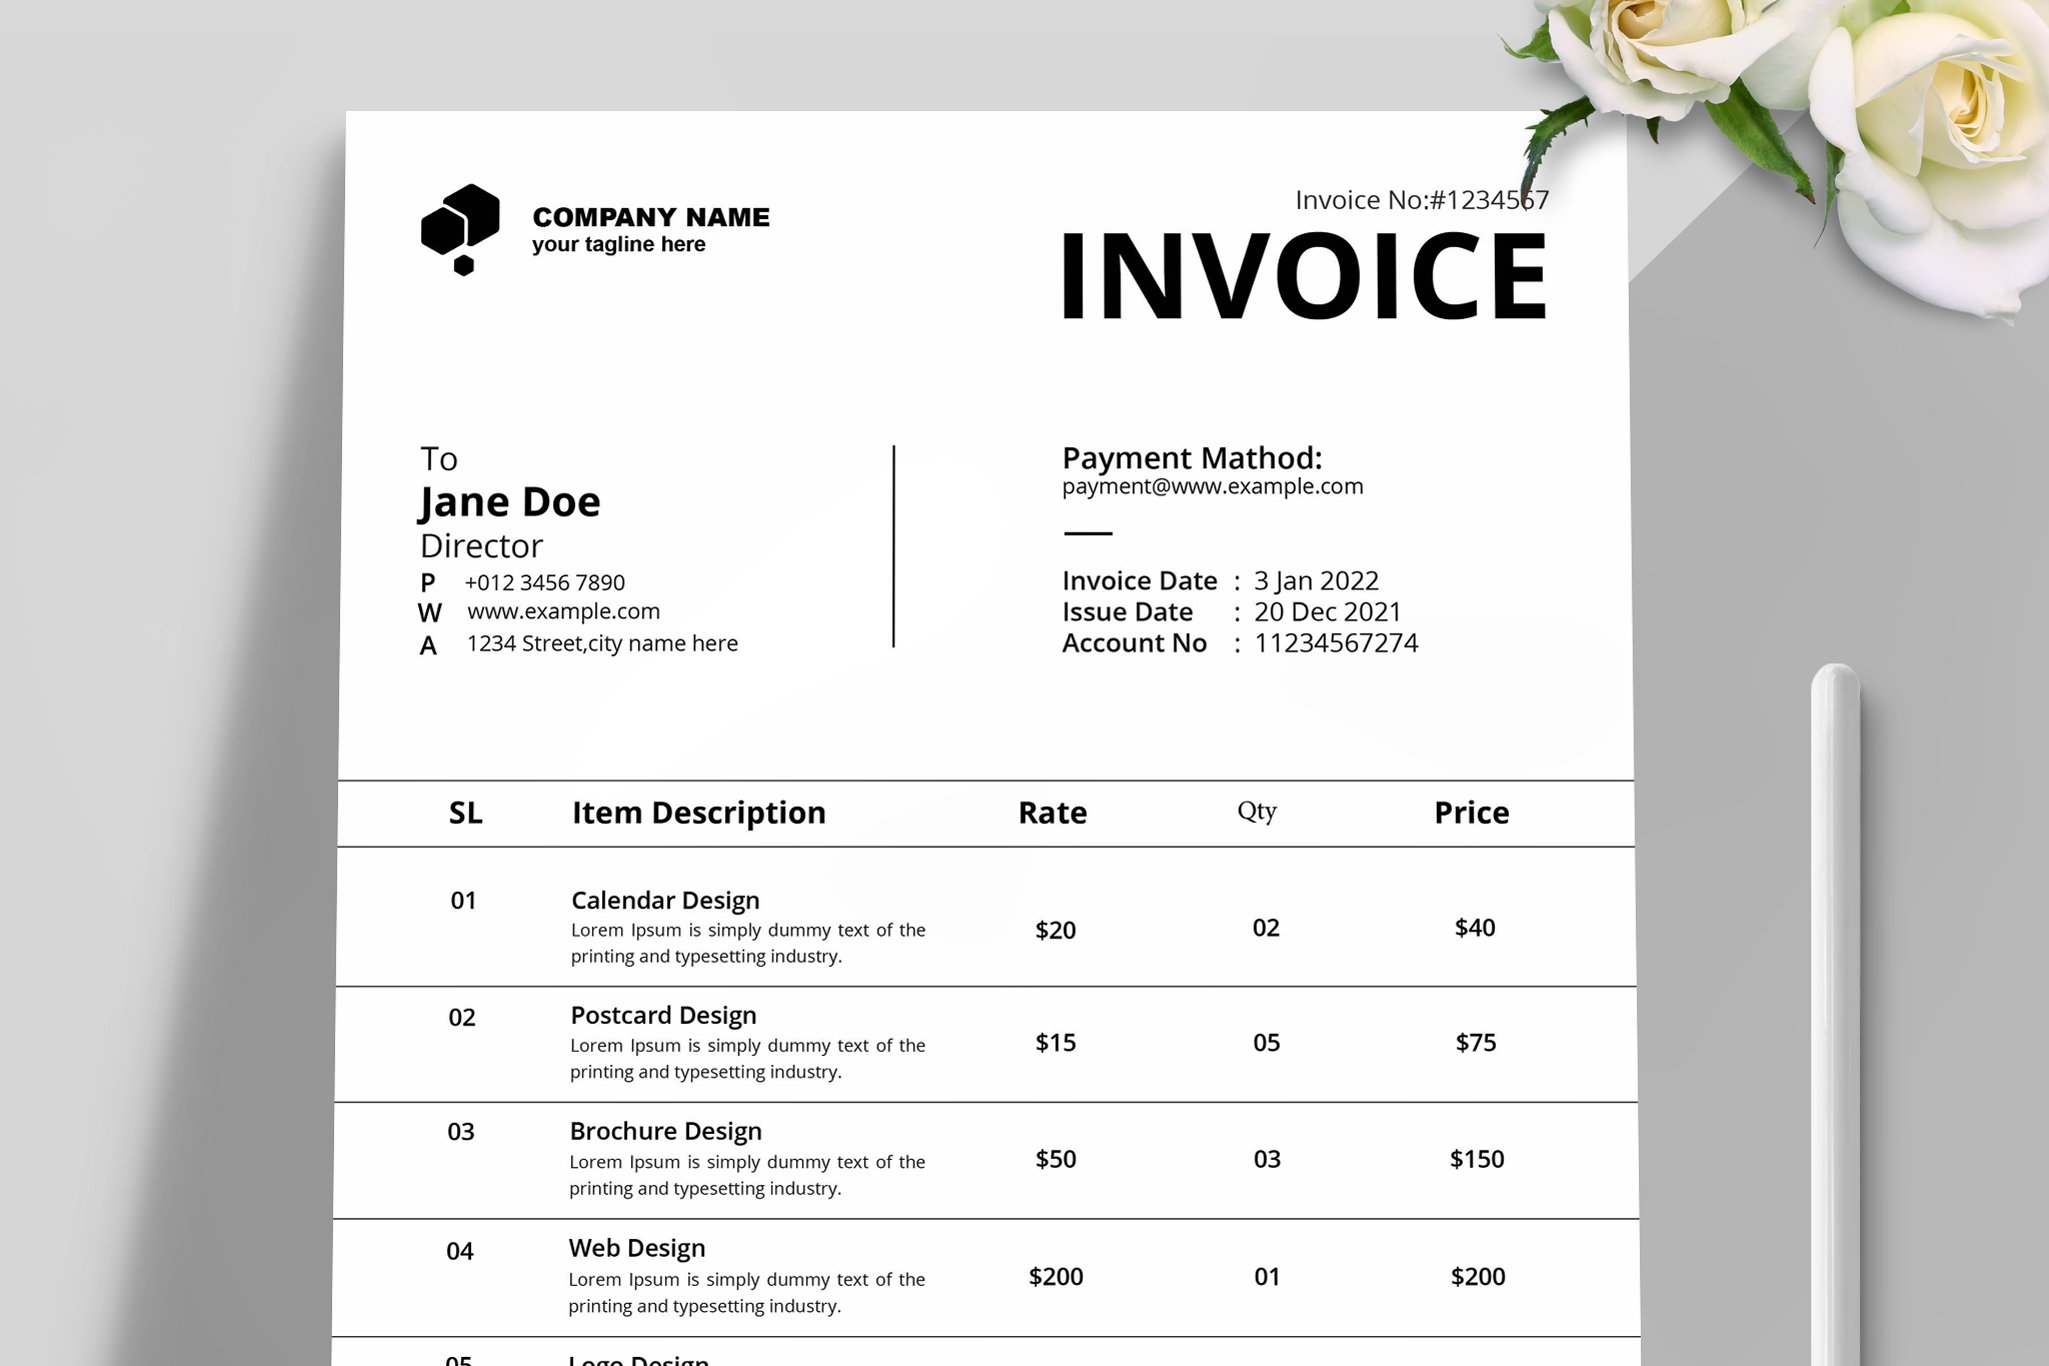 New Invoice 2022 preview image.